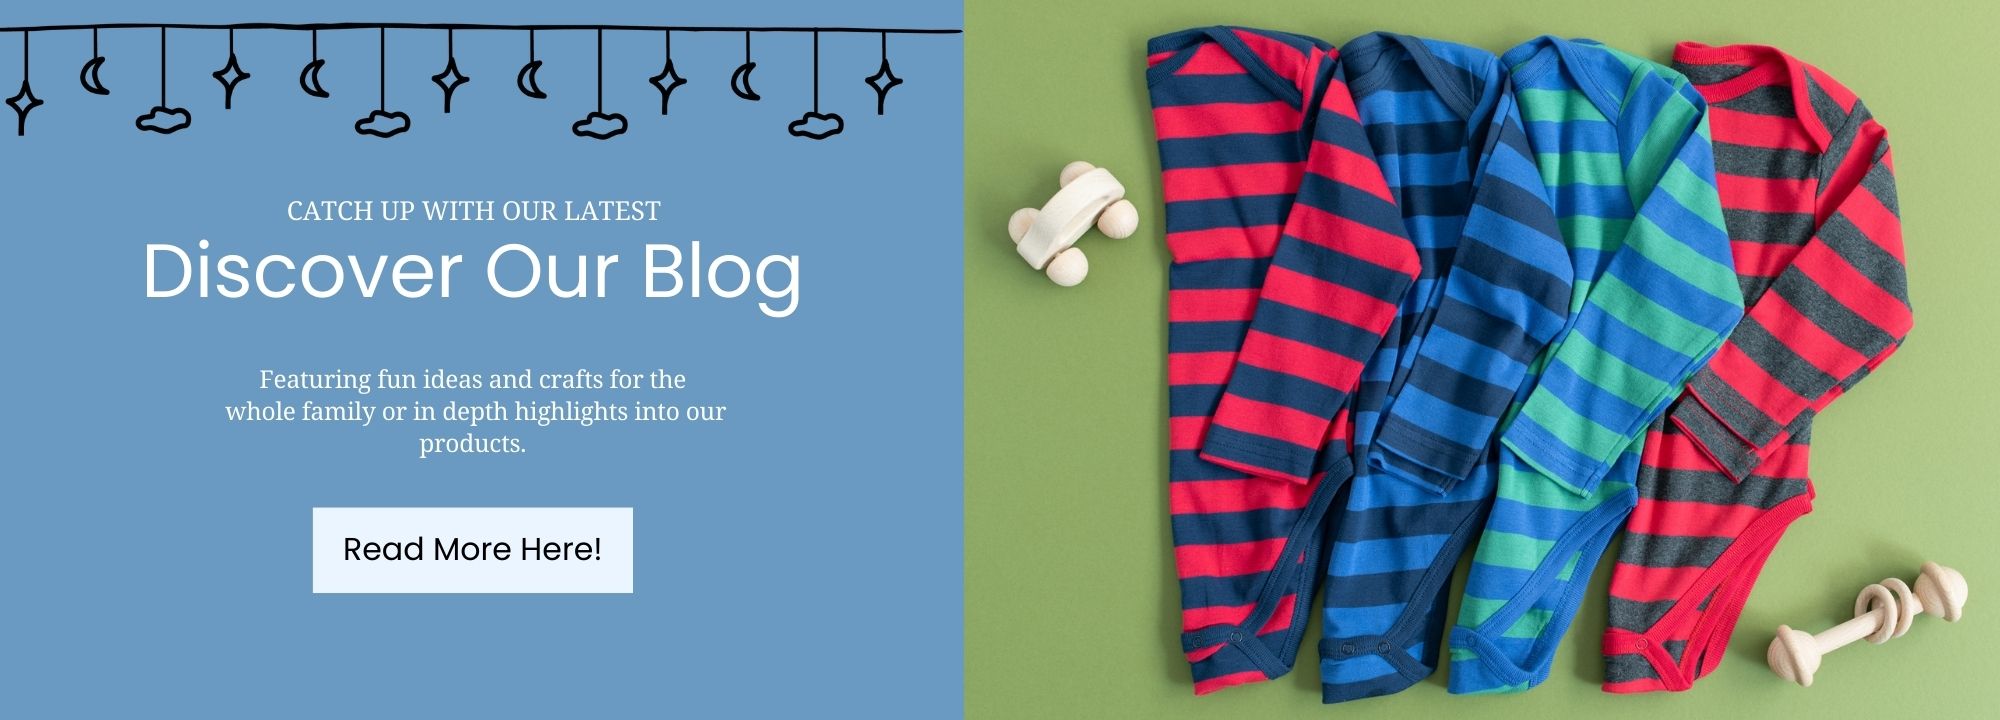 discover our blog; four baby bodysuits, red and navy blue stripes, blue and navy stripes, blue and green stripes, and red and grey stripes